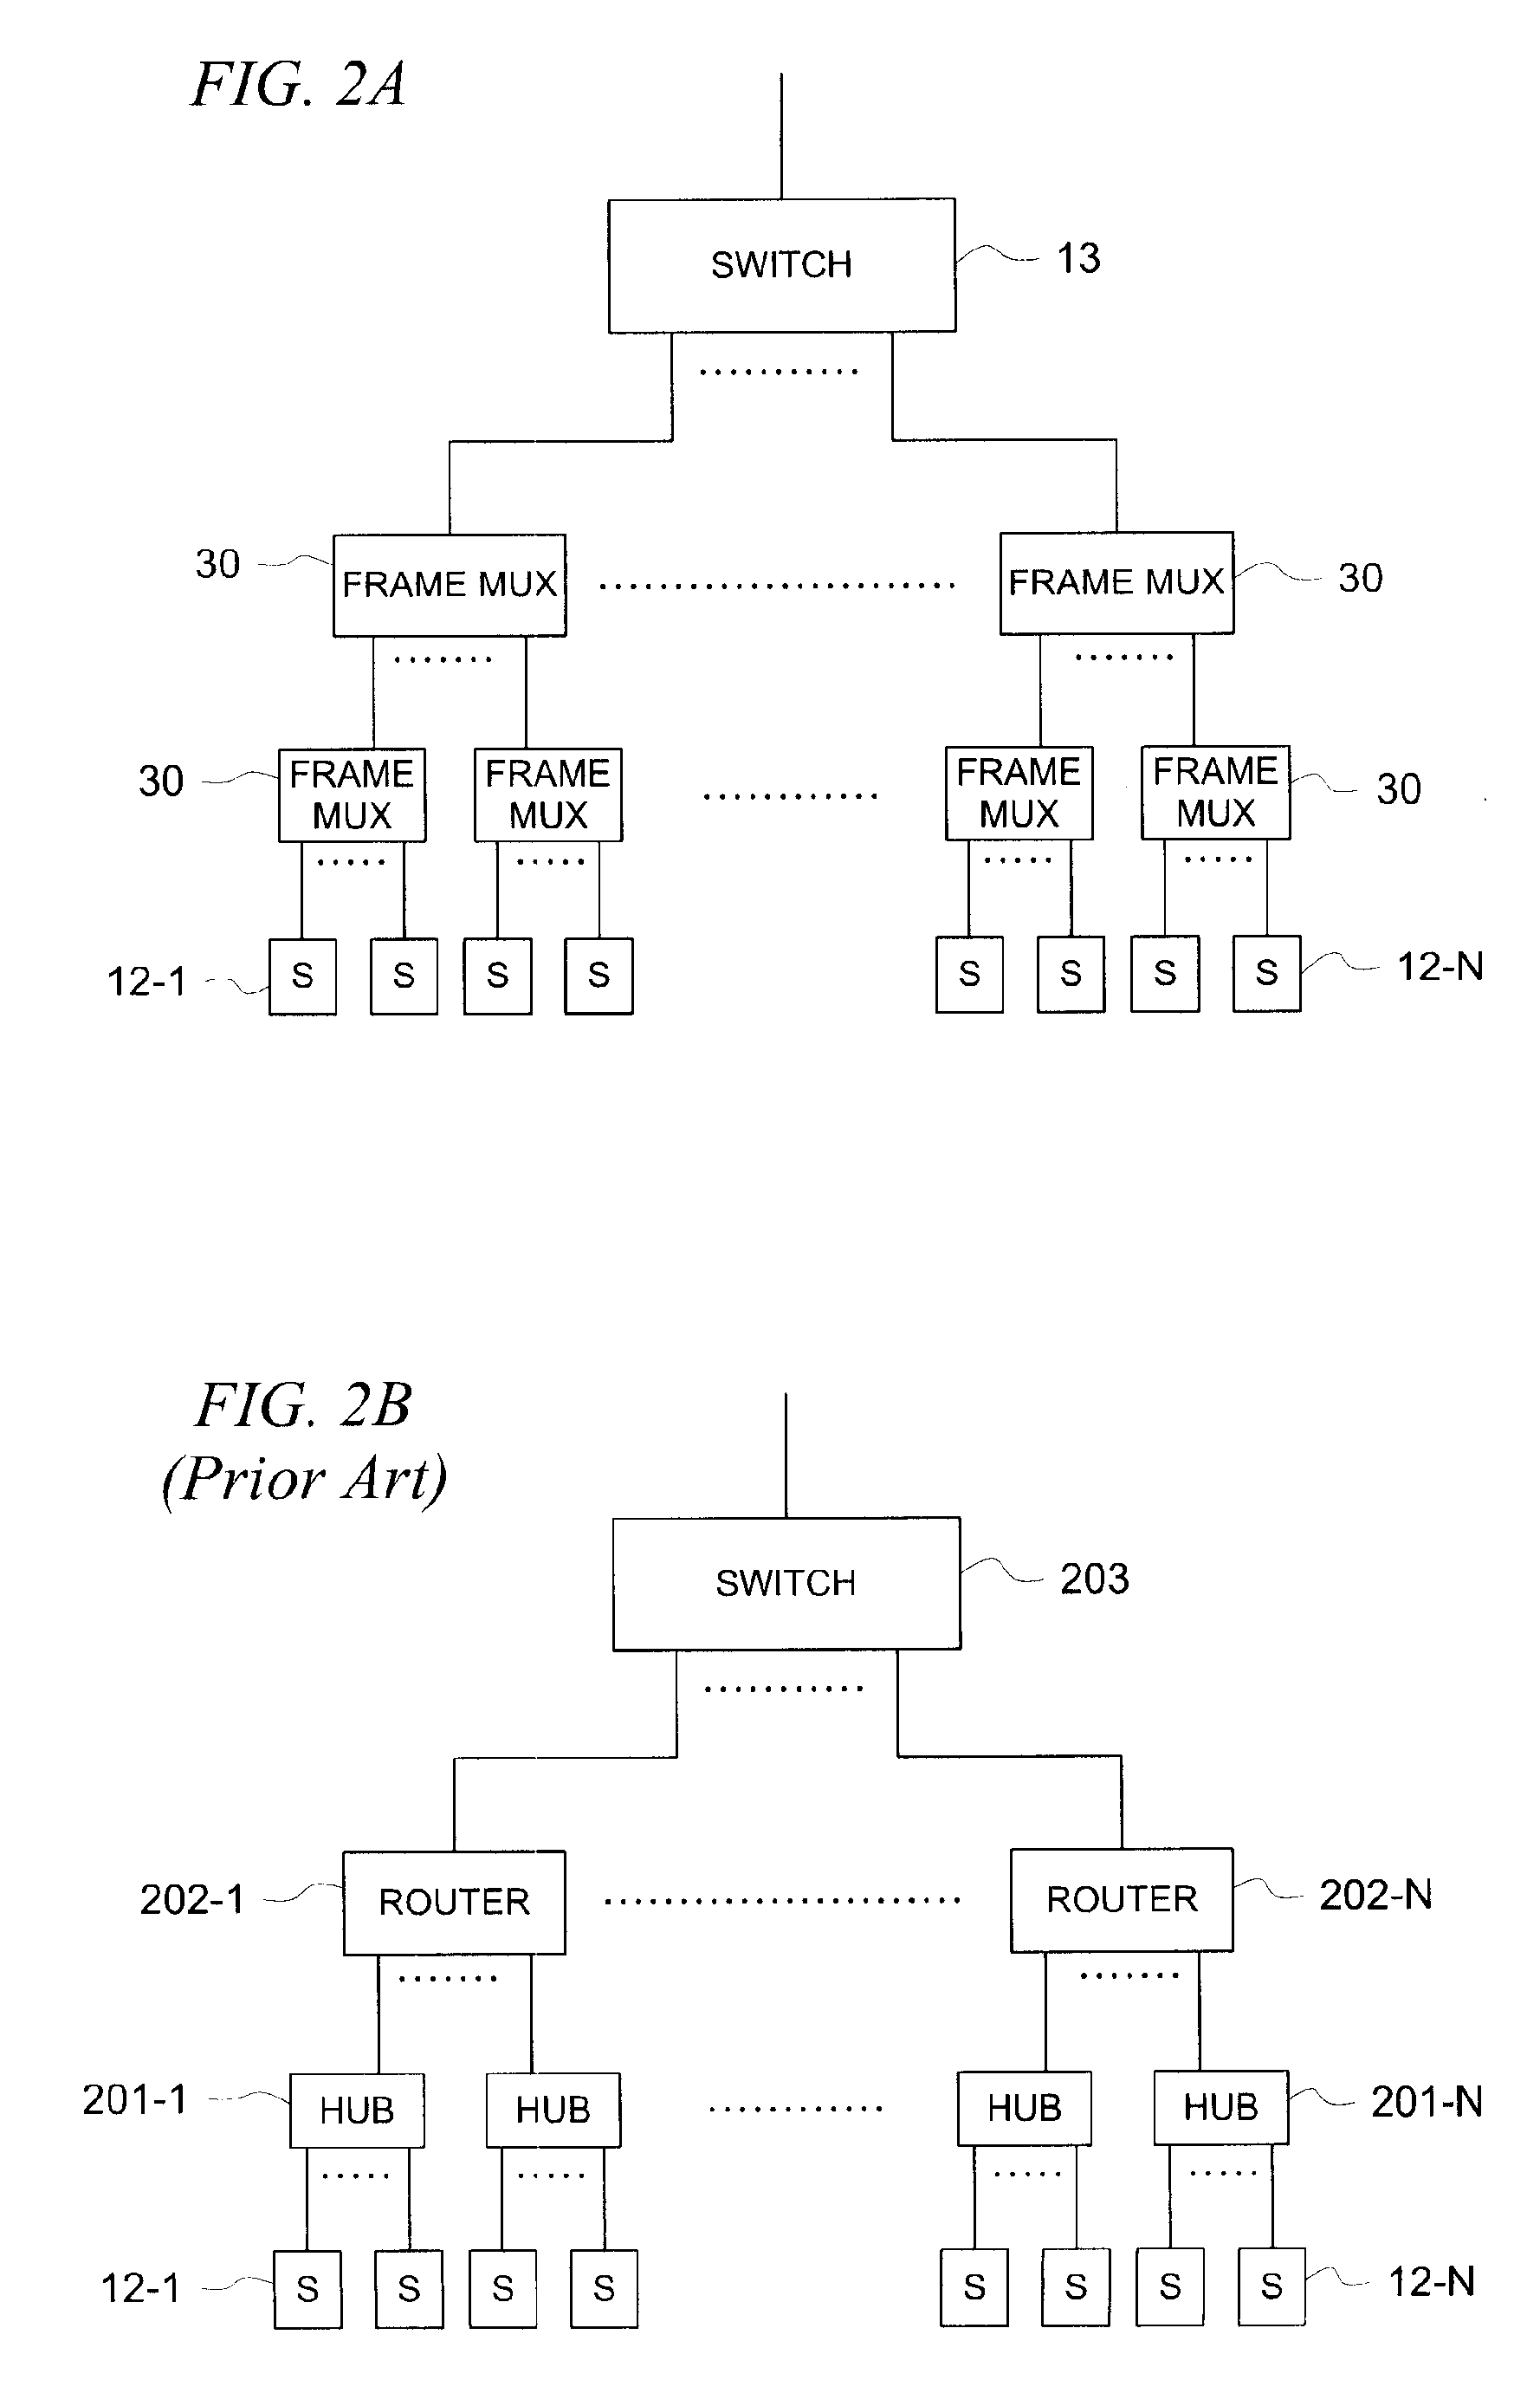 Systems and methods for increasing capacity in collision-based data networks